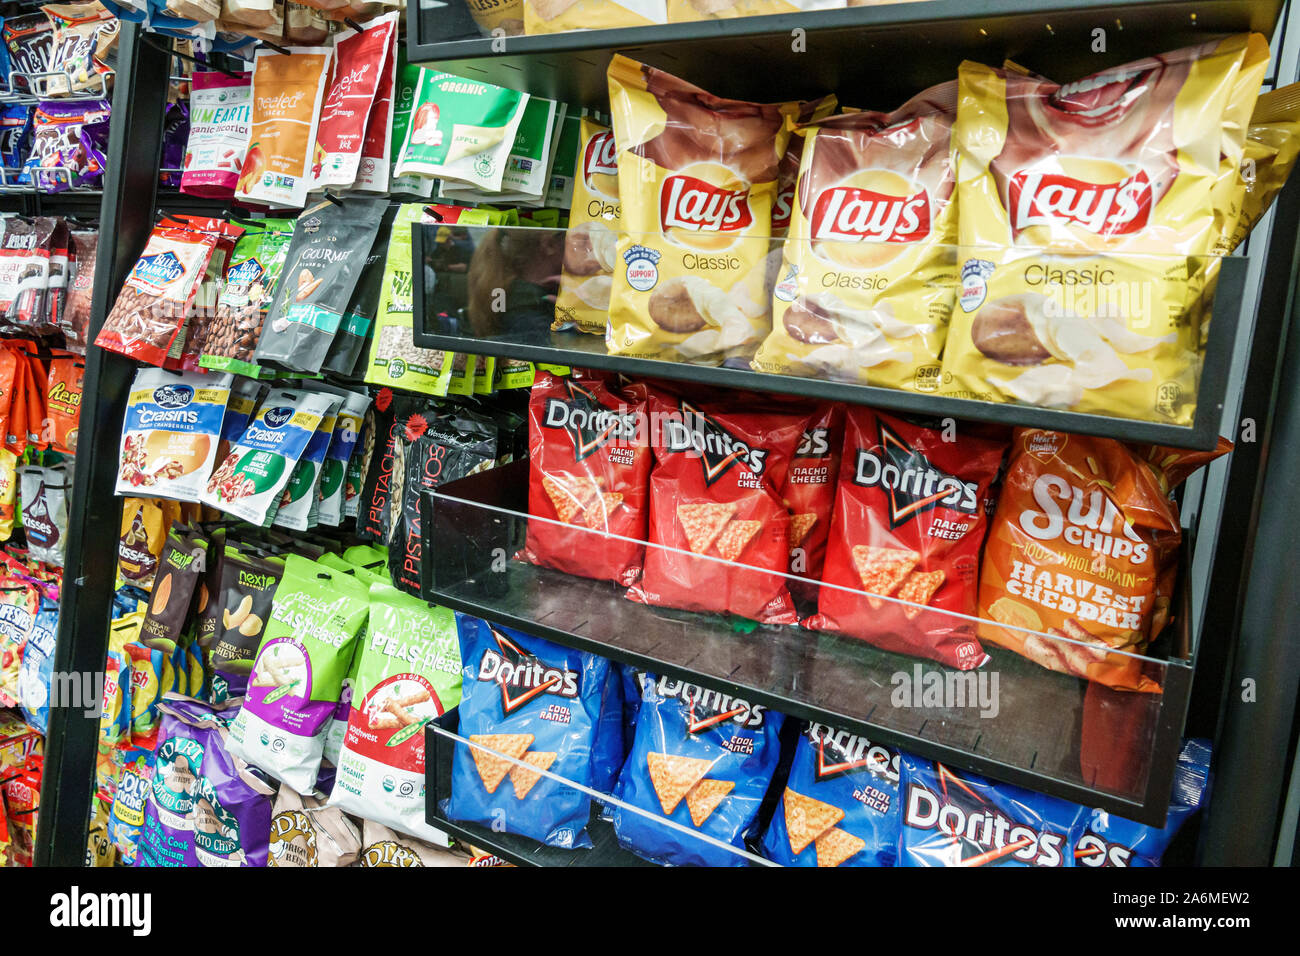 Fort Ft. Lauderdale Florida,Fort Lauderdale-Hollywood International Airport FLL,Terminal 2,snack shop,potato chips crisps,Doritos,Lay's,nuts,display s Stock Photo